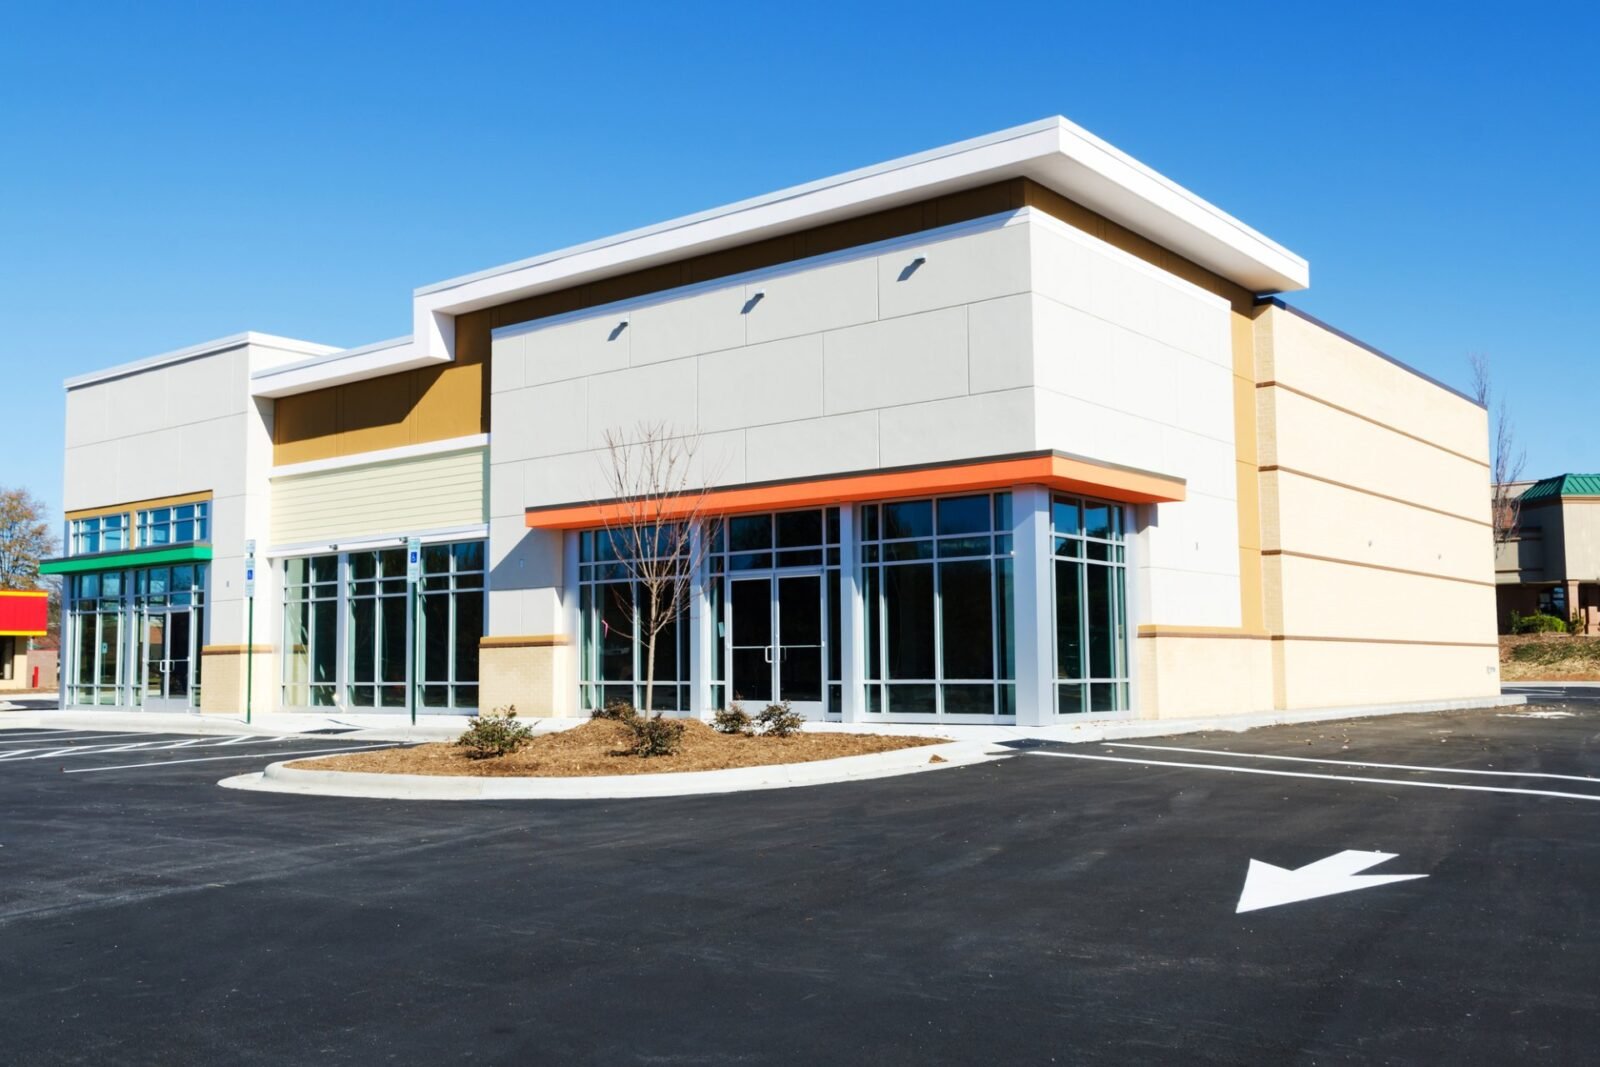 A new, modern commercial building with large windows and a flat roof constructed by a skilled contractor. The storefront features a mix of beige, white, and orange accents. The surrounding area has a spacious, freshly paved parking lot courtesy of Palm Beach Asphalt, with a few small shrubs and a clear blue sky above.